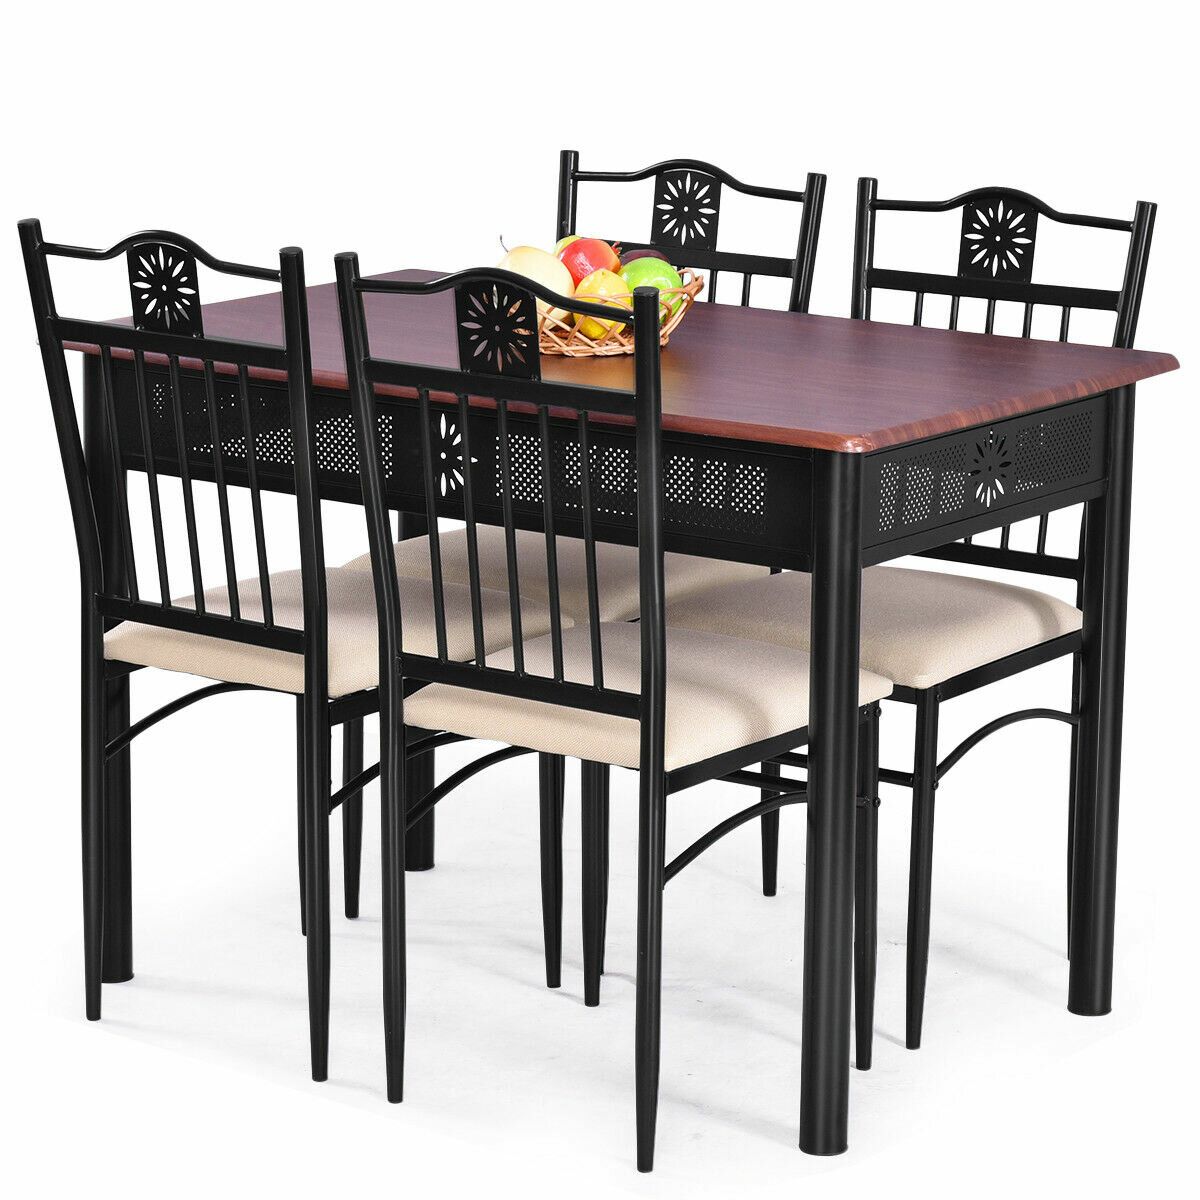 Miskell 3 Piece Dining Sets In Newest Winston Porter Ganya 5 Piece Dining Set & Reviews (View 10 of 20)